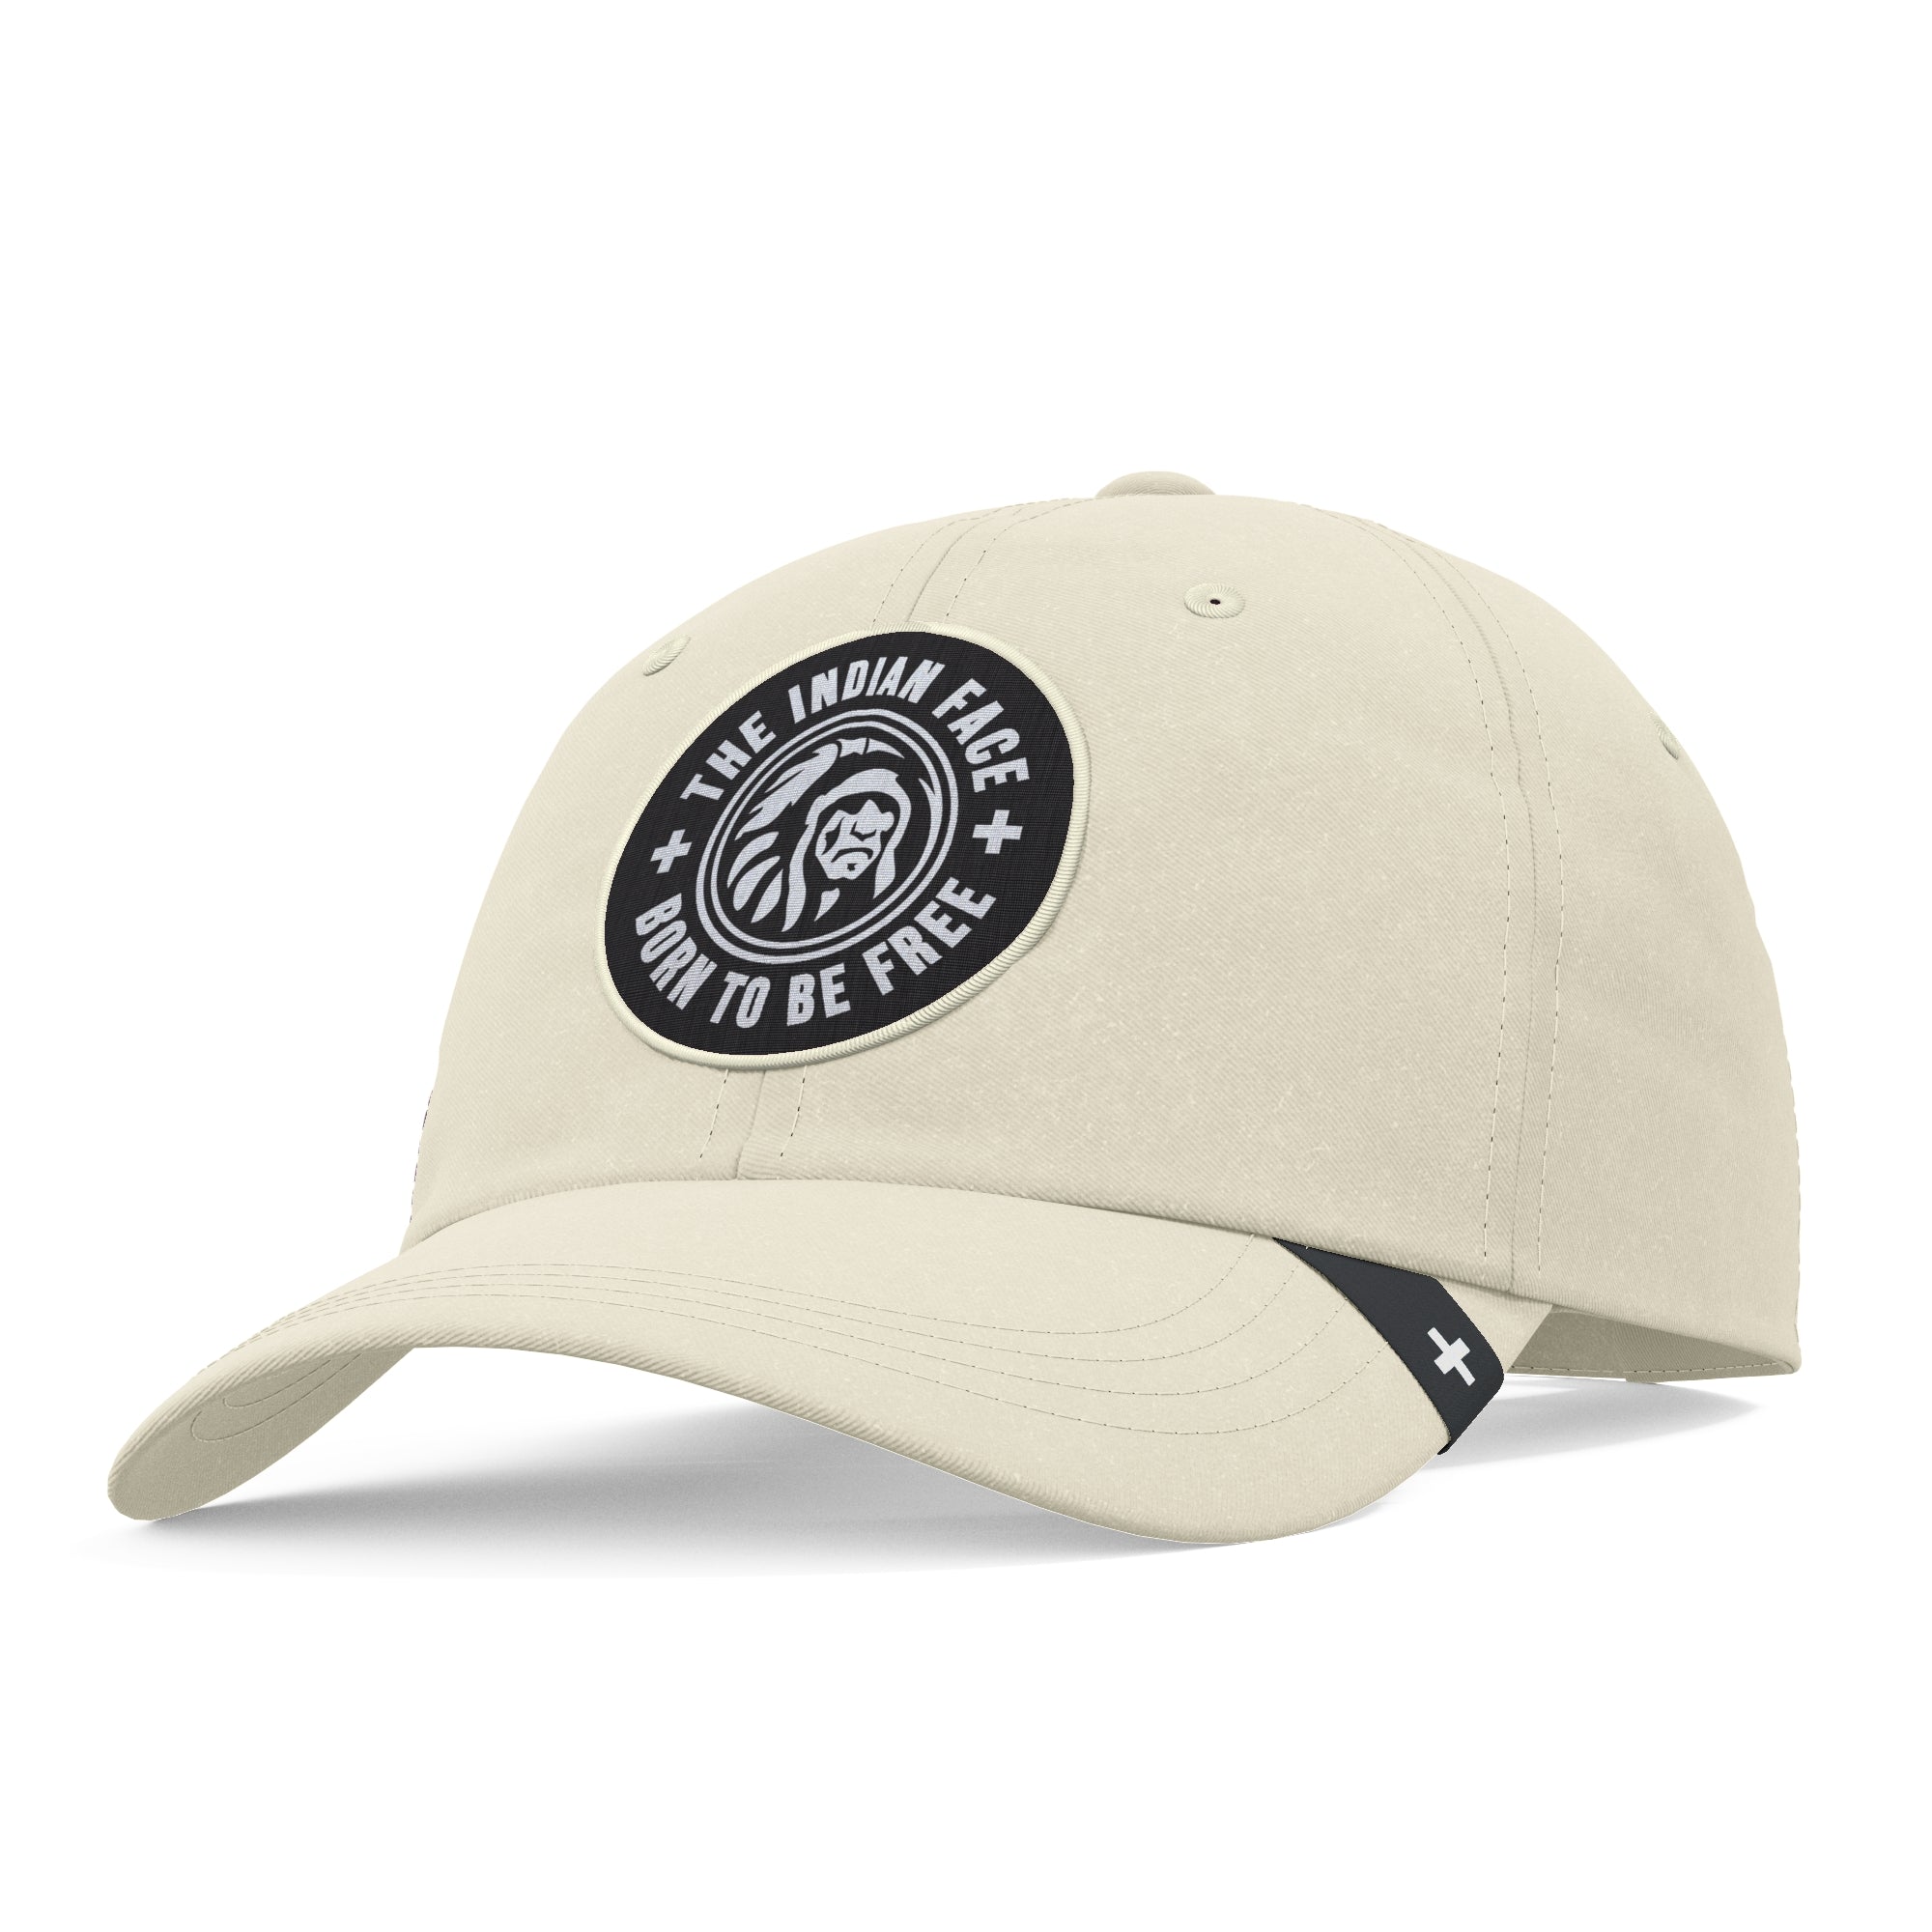 Gorra The Indian Face Nature - blanco - 